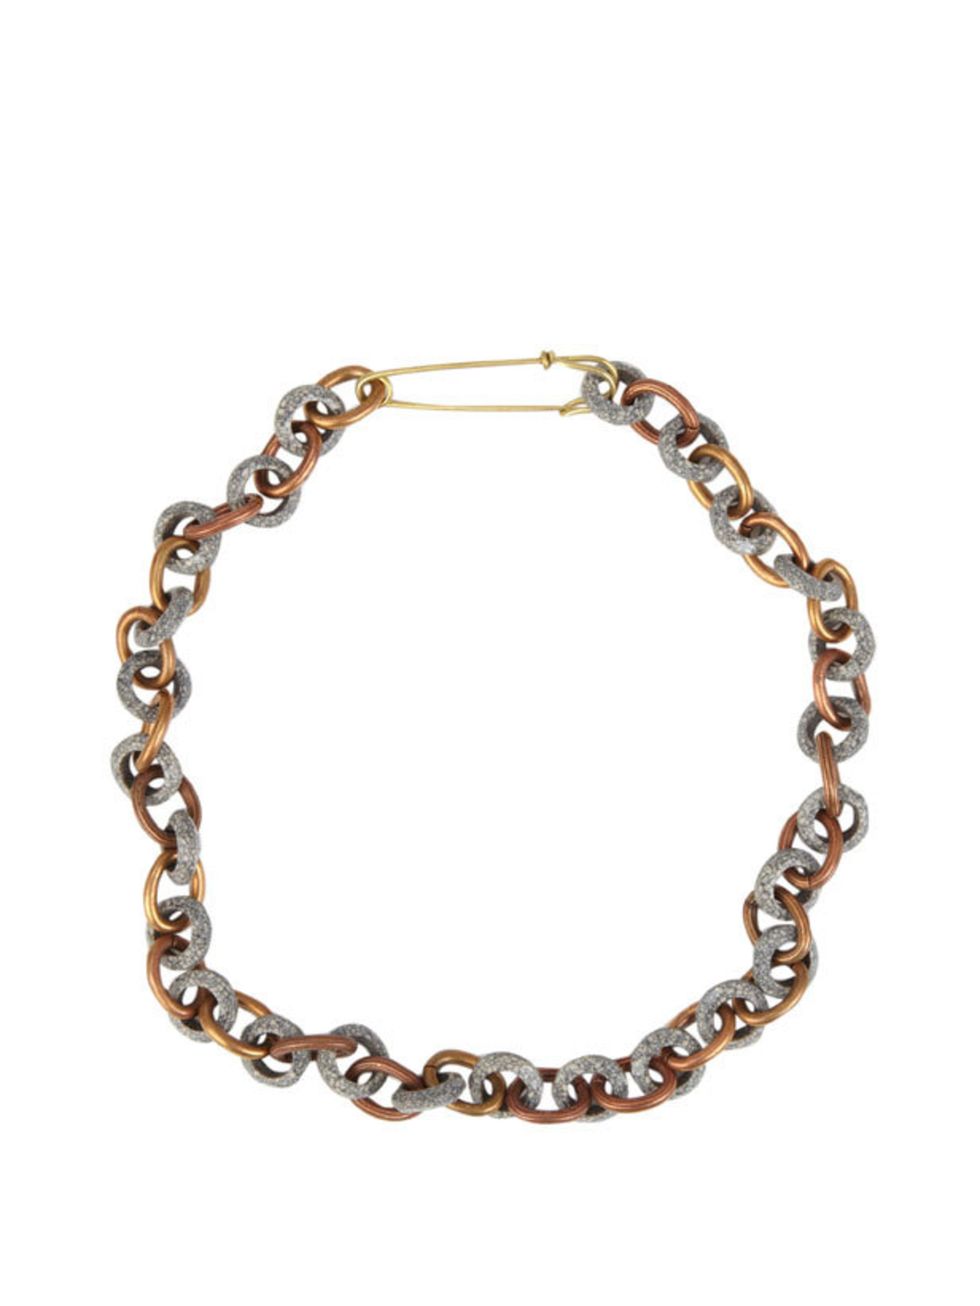 <p> </p><p>We instantly fell for JW Anderson's Spring/Summer 2011 collection at London Fashion Week, and thanks to Liberty's exclusive access to the collection, you can get your hands on the pieces like this ceramic link necklace a whole season ahead! J.W